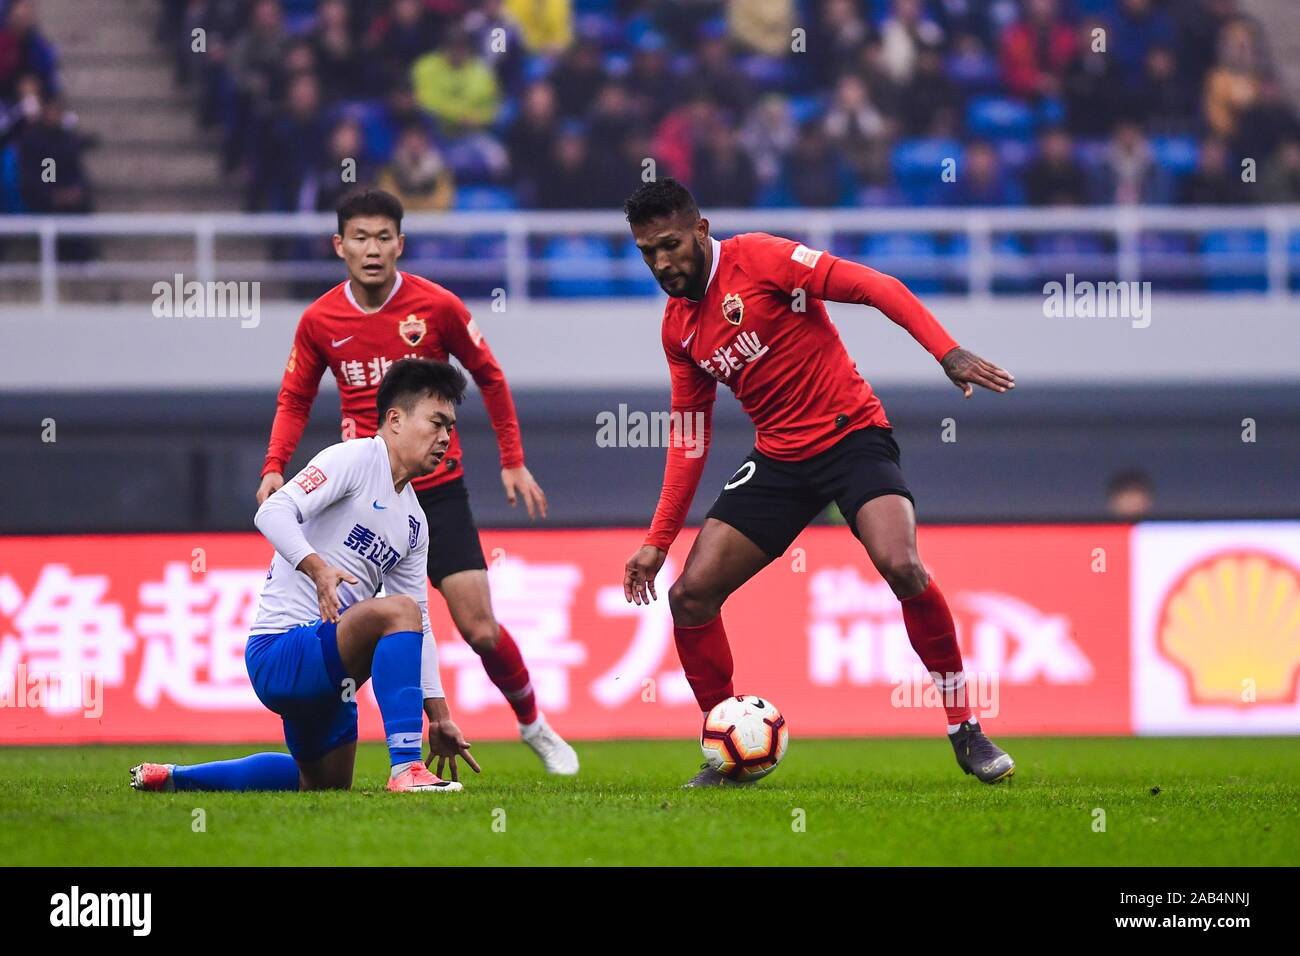 Brazilian-born Portuguese football player Dyego Sousa of Shenzhen F.C., right, keeps the ball during the 28th round match of Chinese Football Association Super League (CSL) against Tianjin TEDA in Tianjin, China, 23 November 2019. Tianjin TEDA slashed Shenzhen F.C. with 3-0. Stock Photo